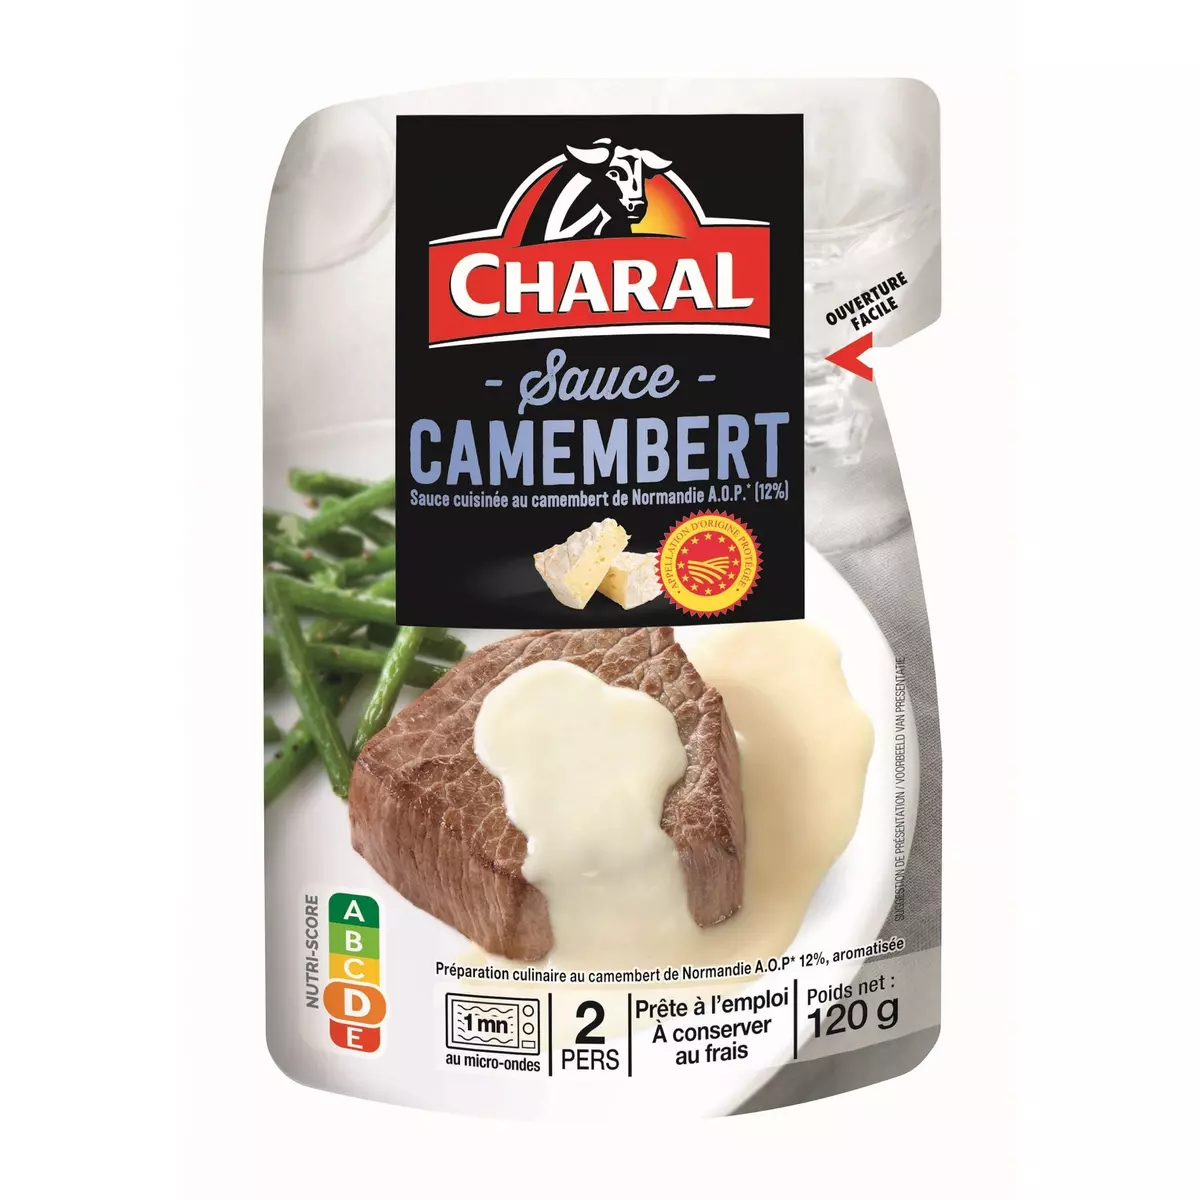 CHARAL Sauce camembert 2 personnes 120g